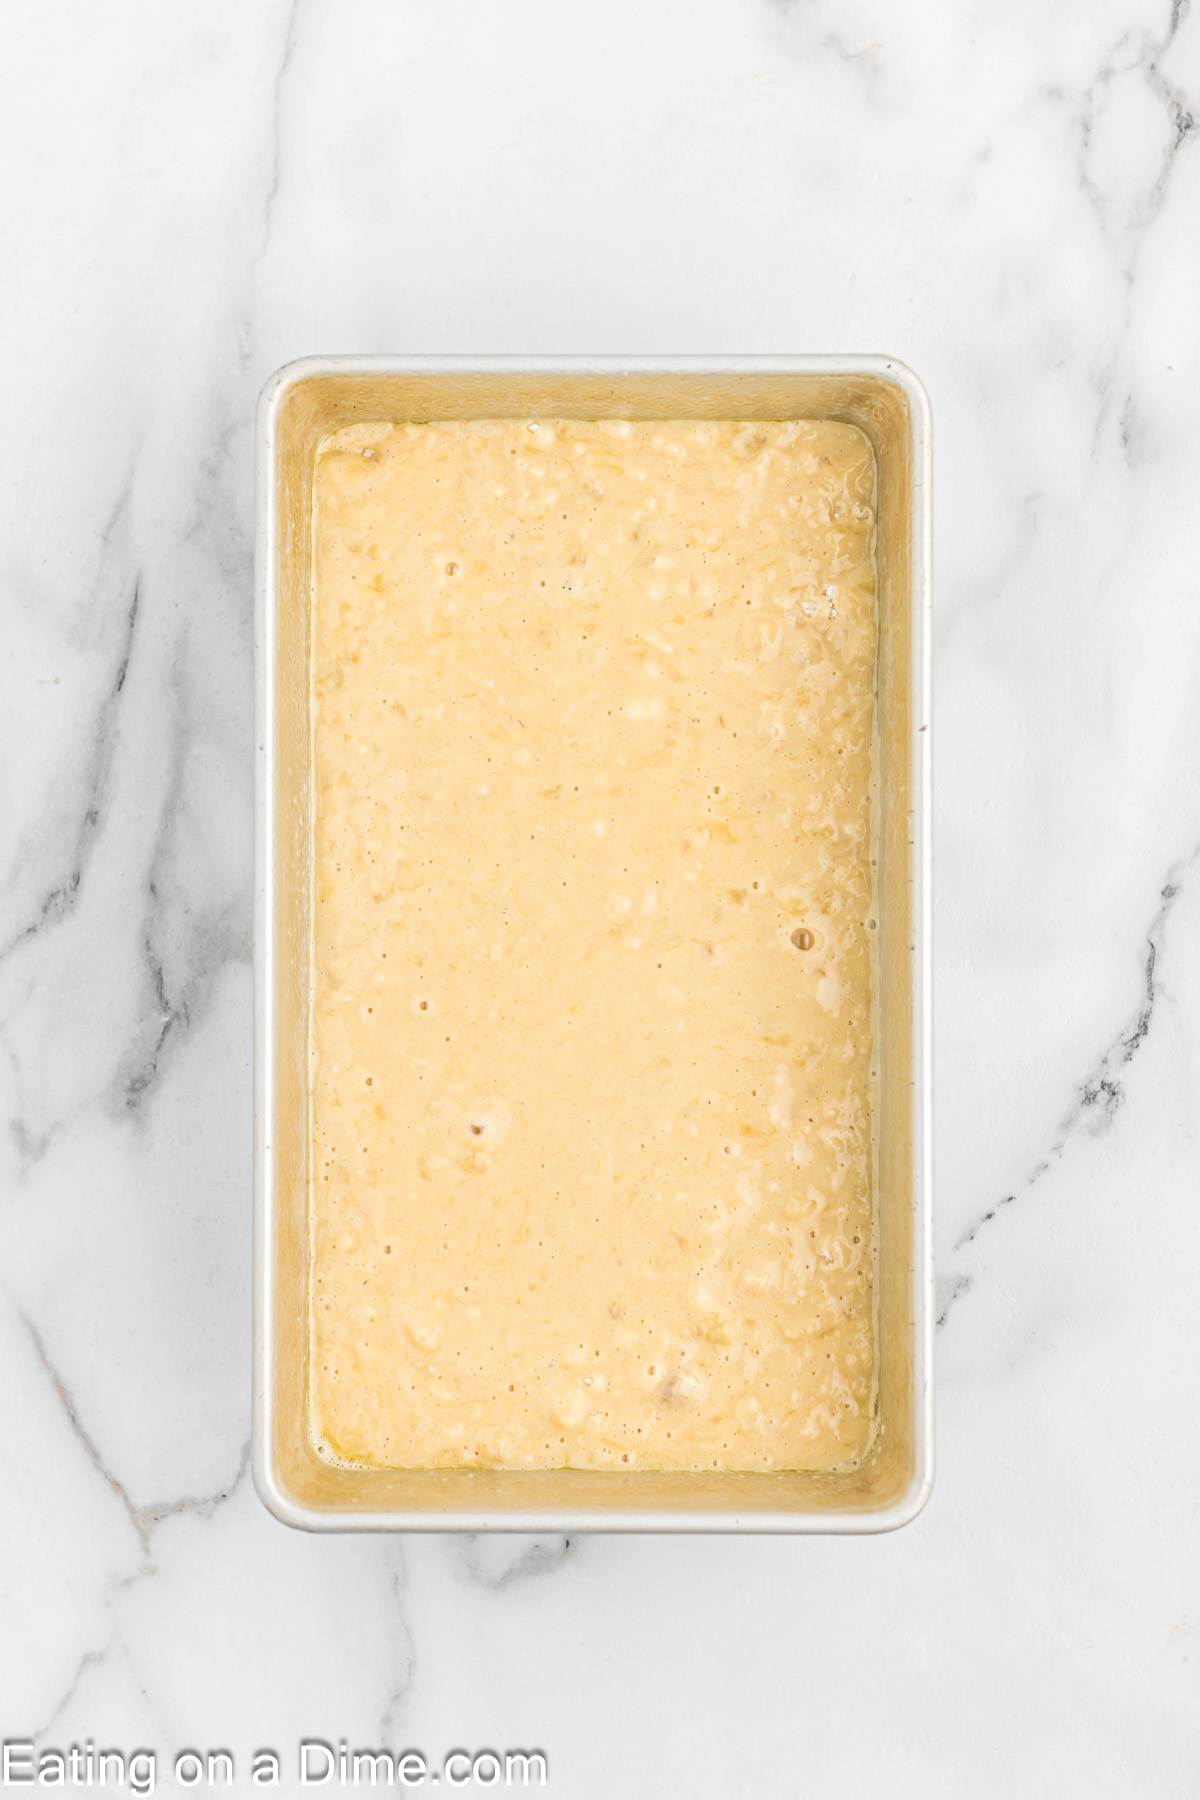 Pouring the banana bread batter in the loaf pan